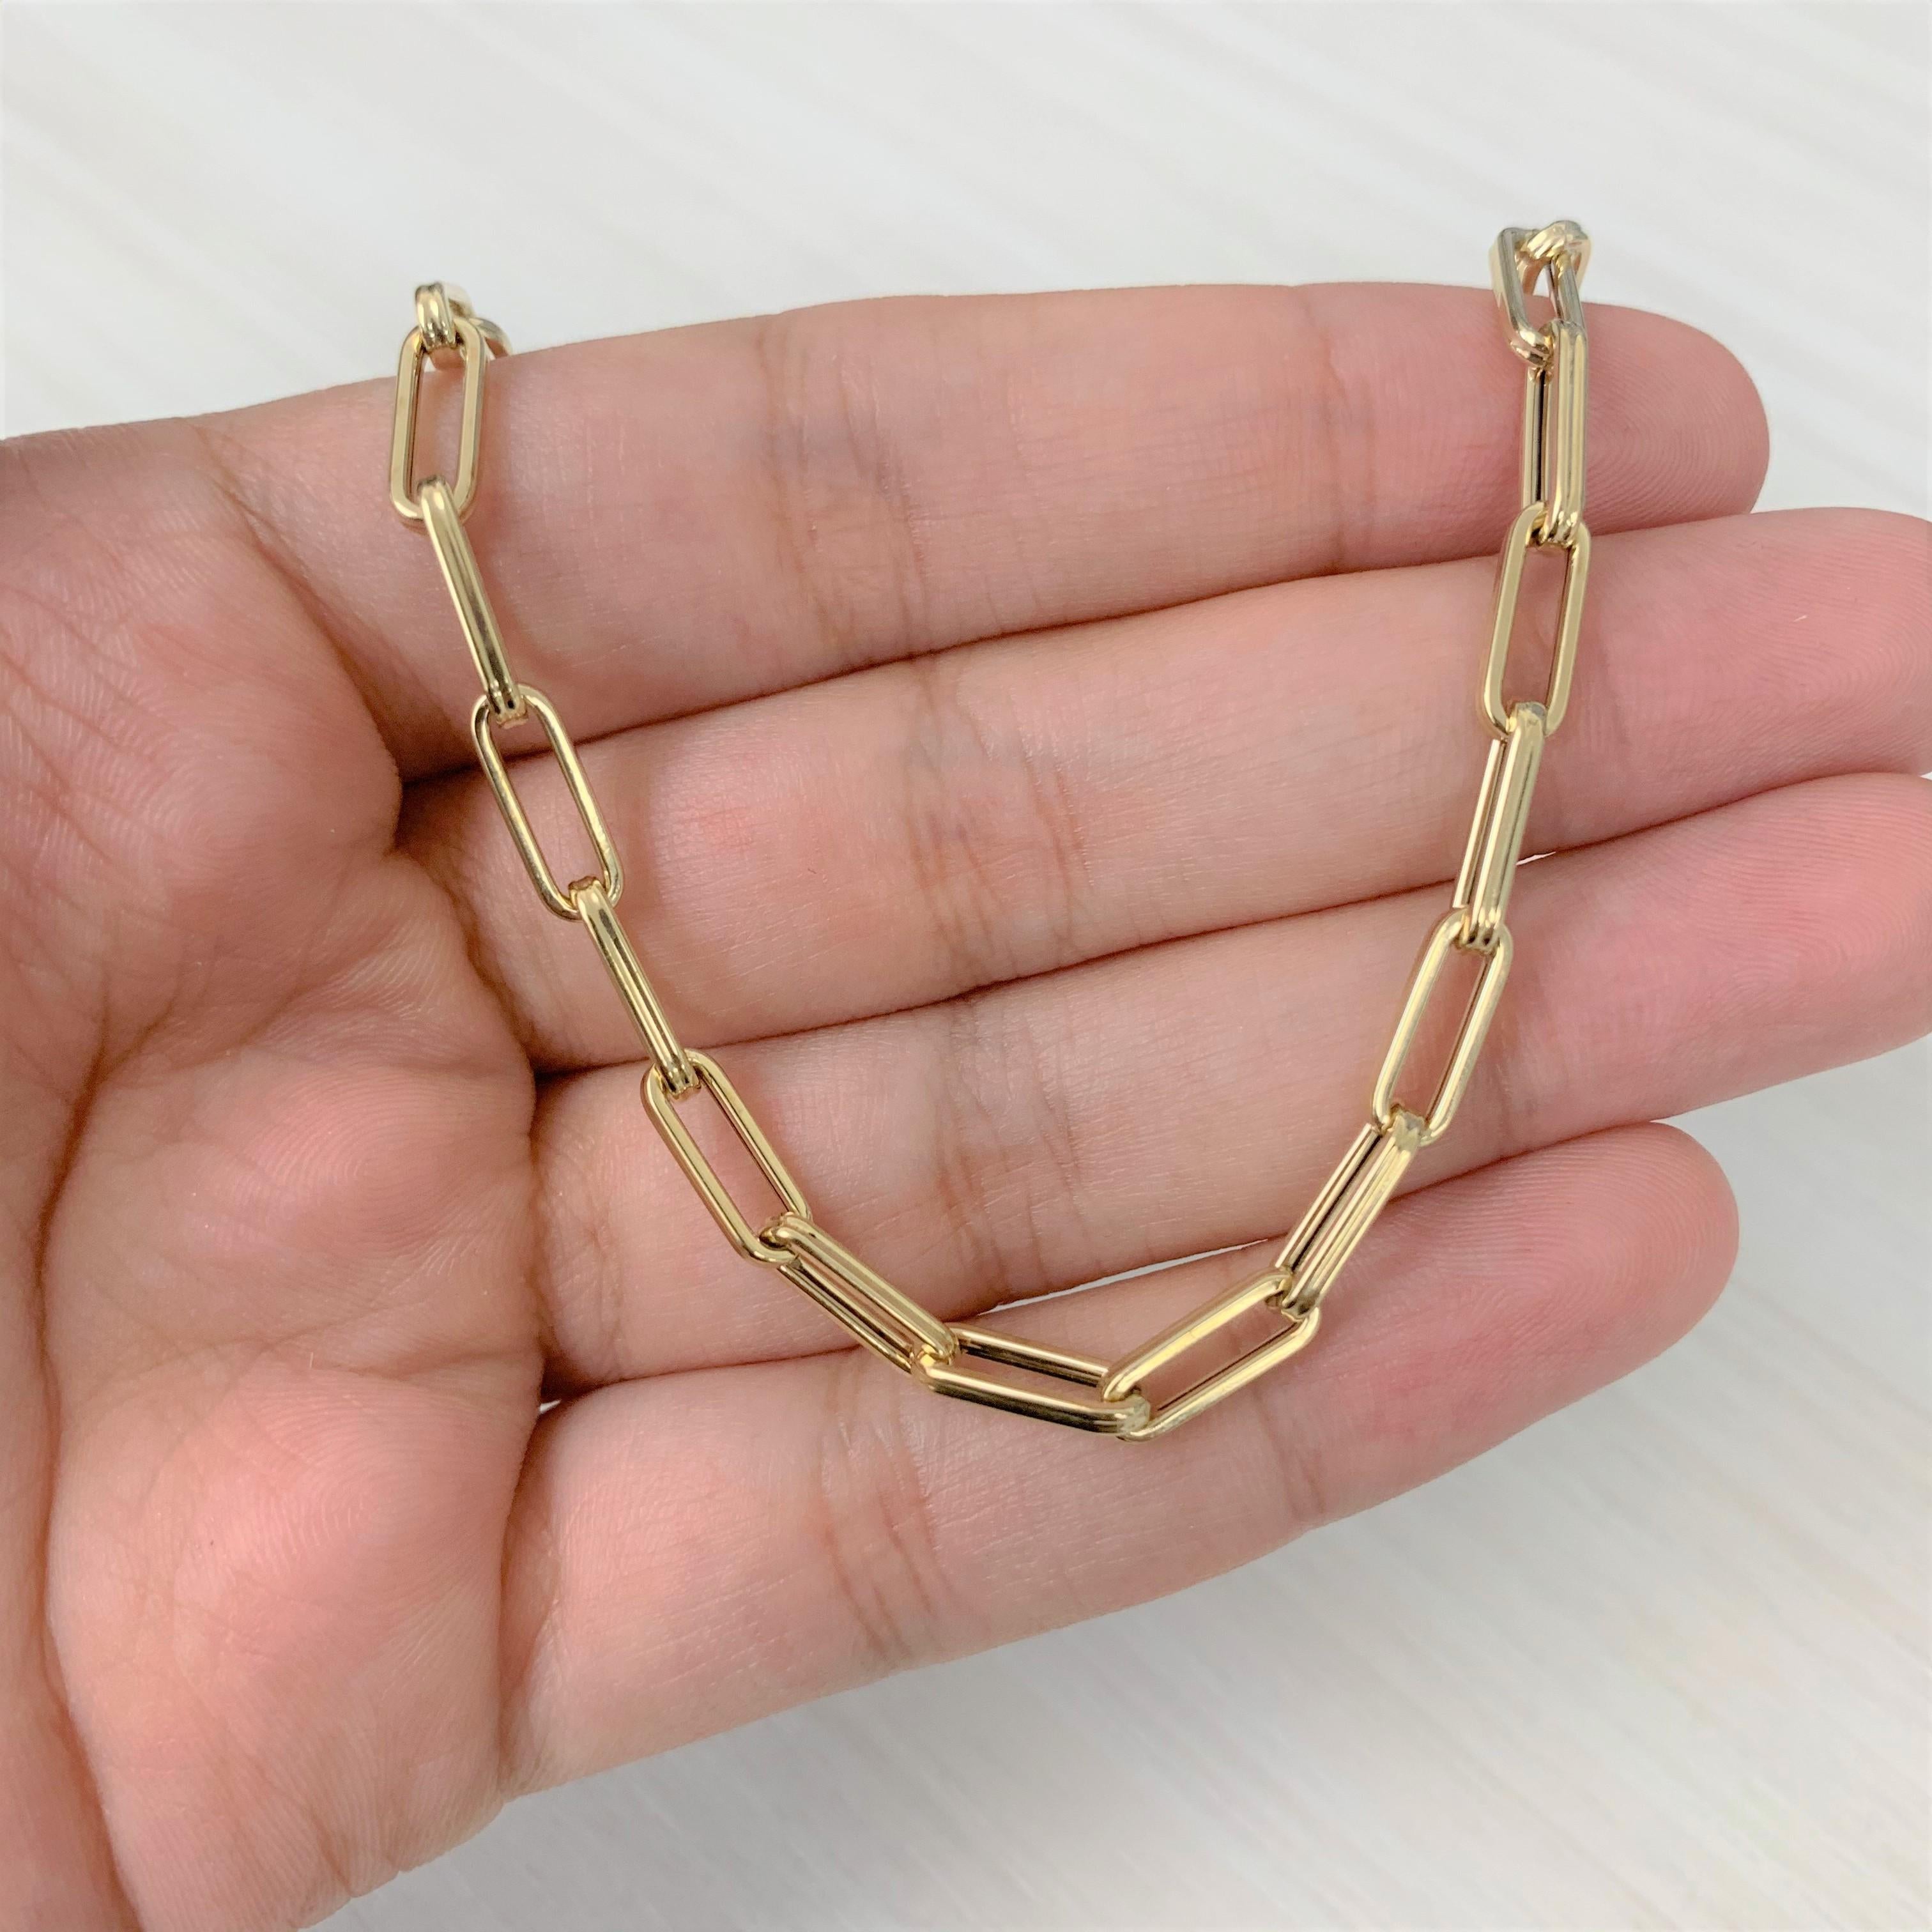 14 Karat Yellow Gold Paperclip Link Chain Necklace, Made in Italy In New Condition For Sale In Great neck, NY